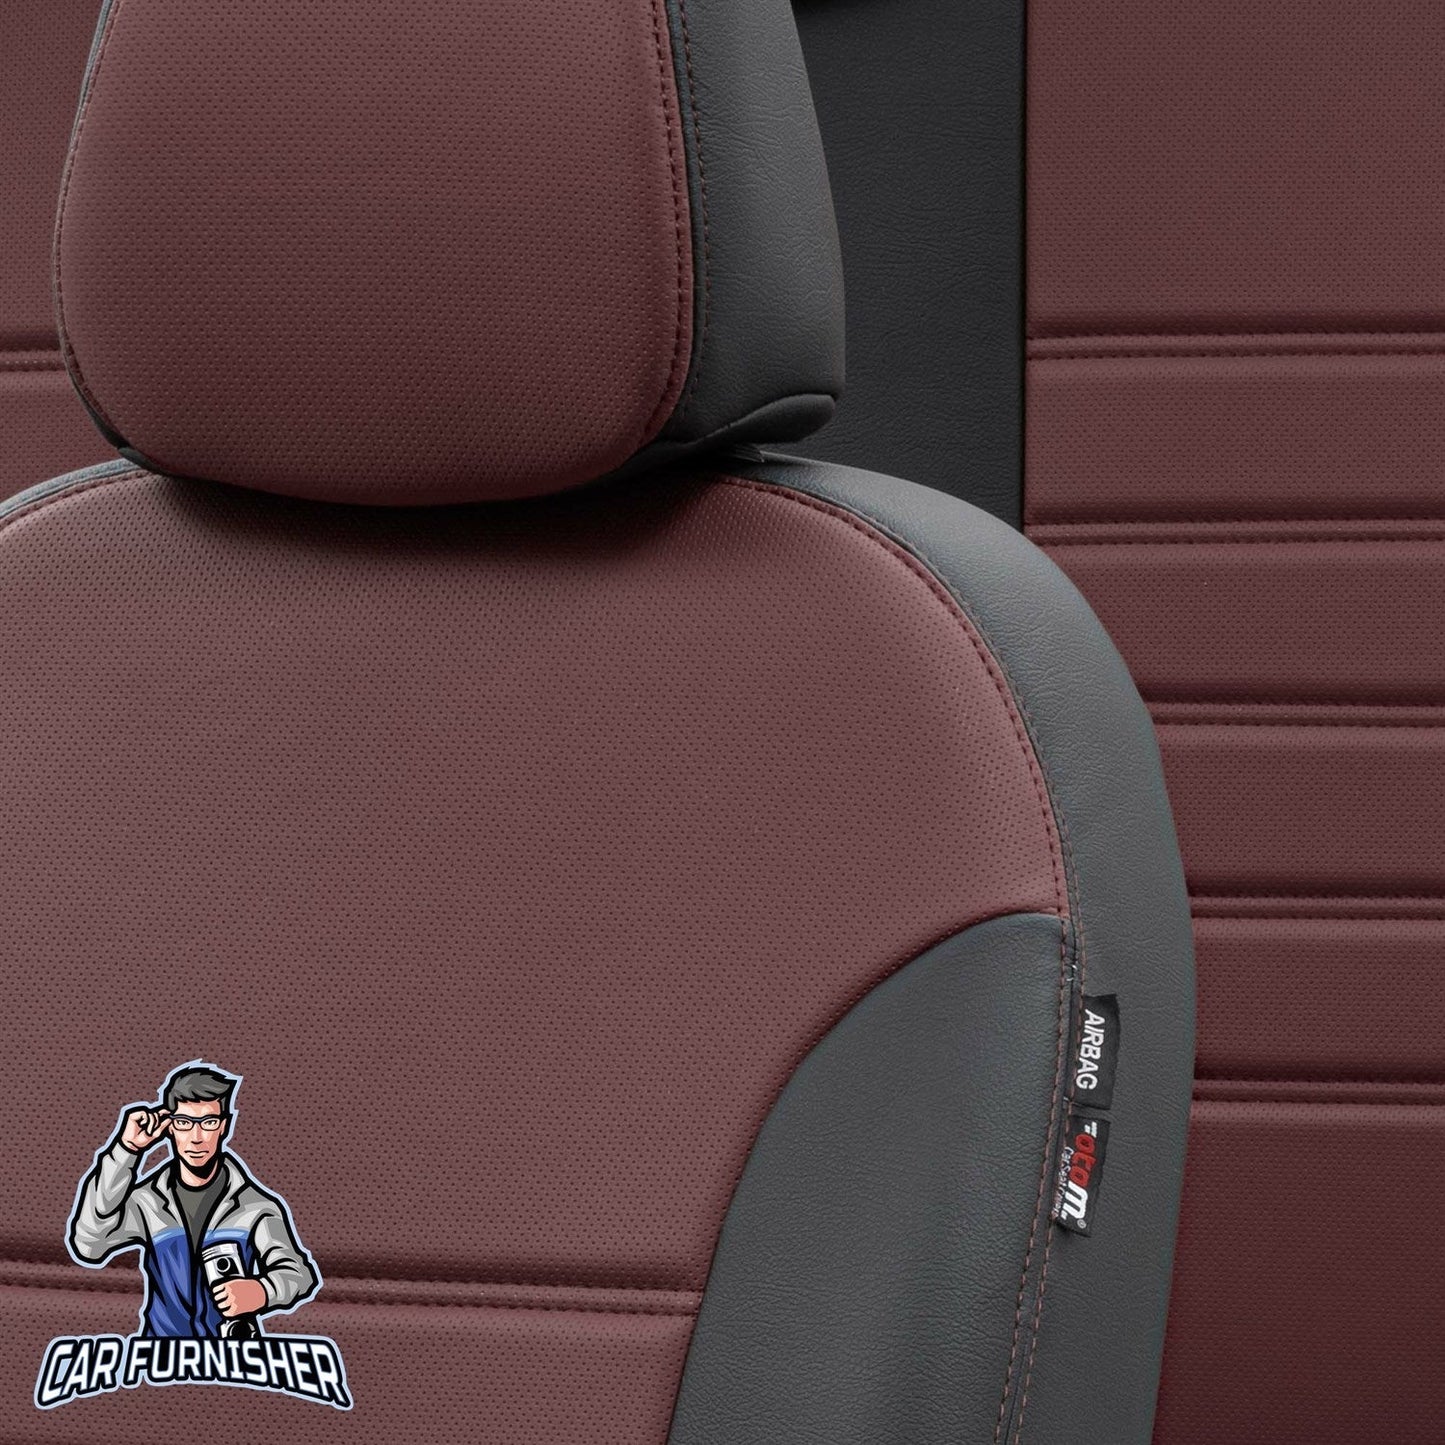 Dfm Succe Seat Covers Istanbul Leather Design Burgundy Leather